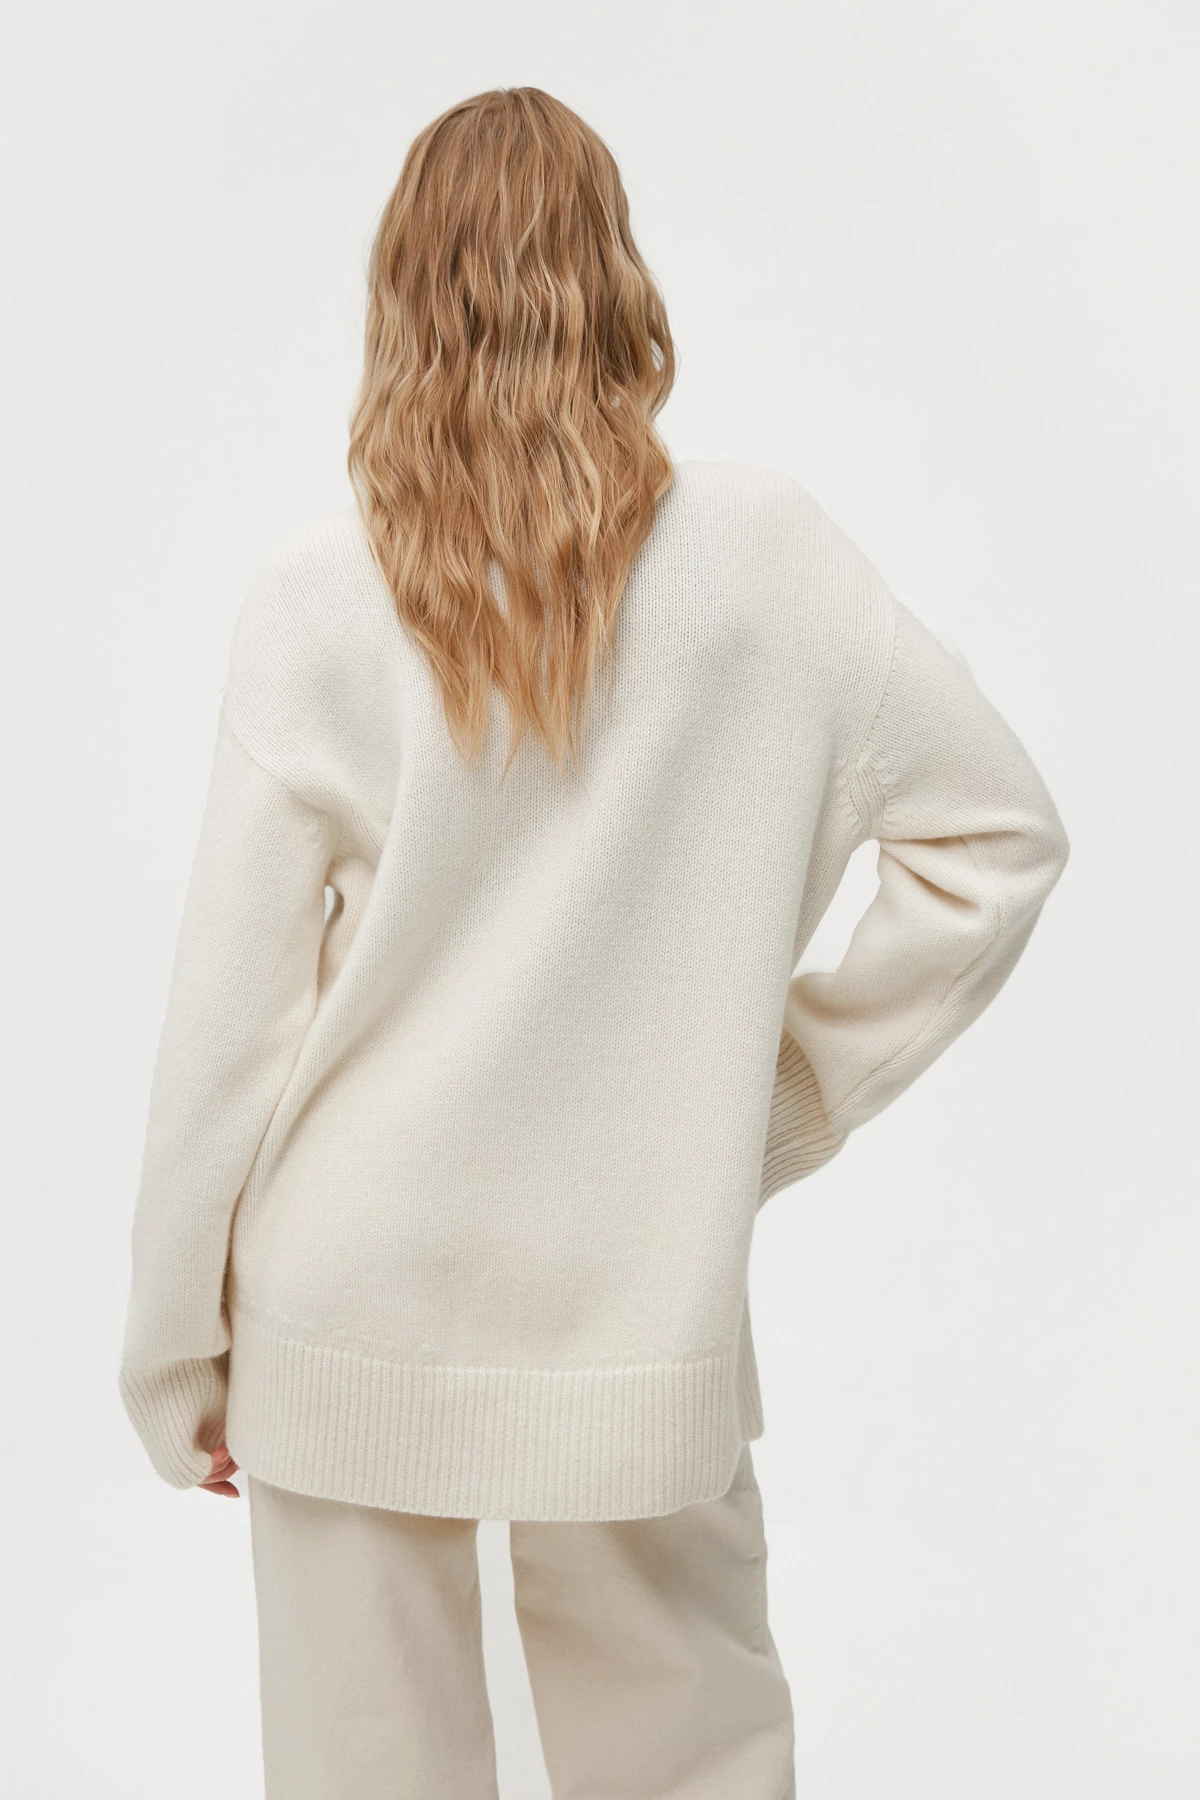 Cashmere milky high neck loose-fit sweater, photo 5